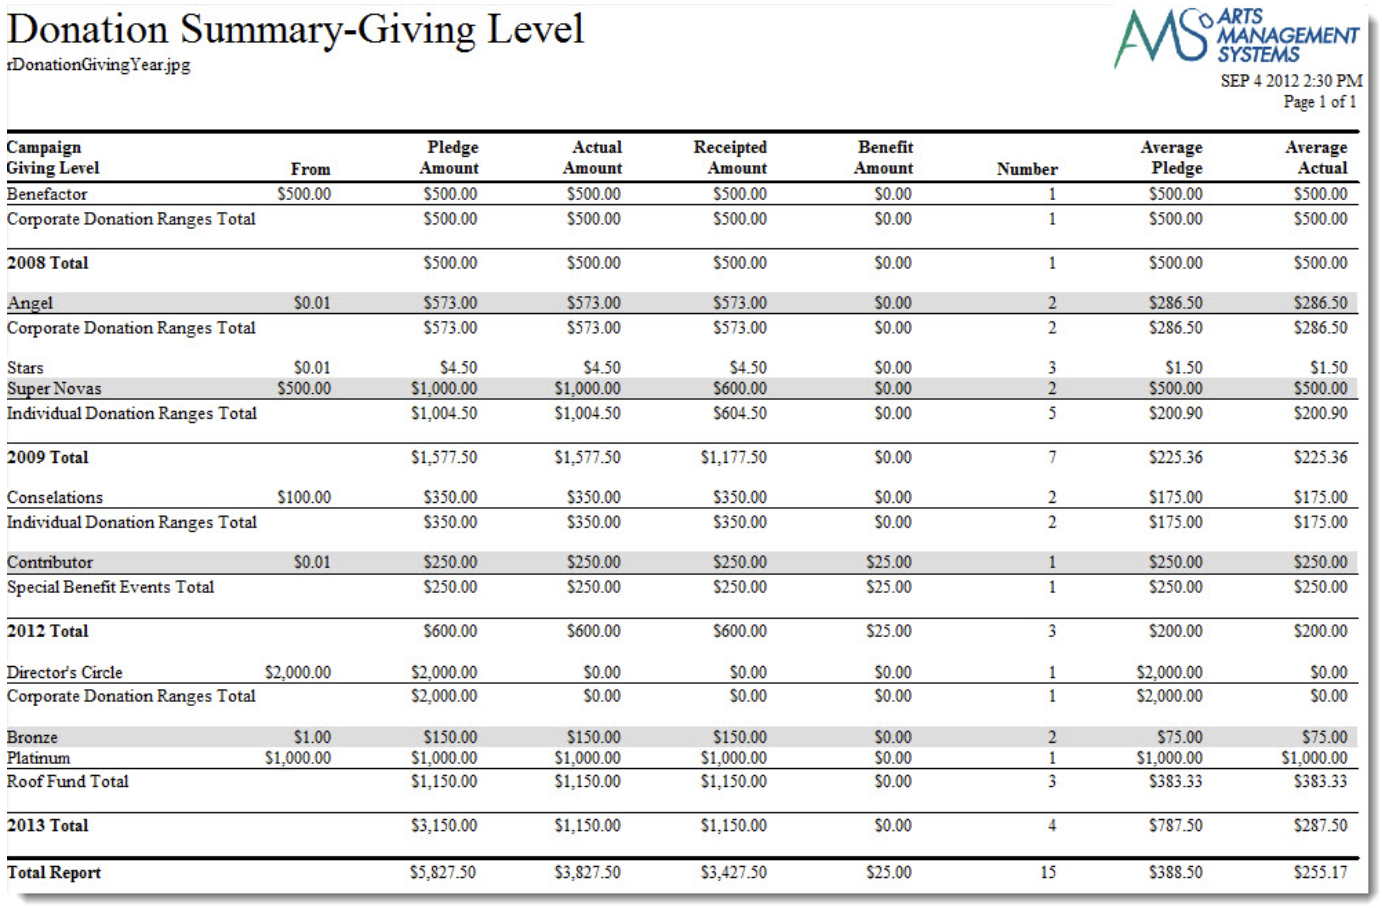 Donor Summary - Giving Level & Year (Fiscal)